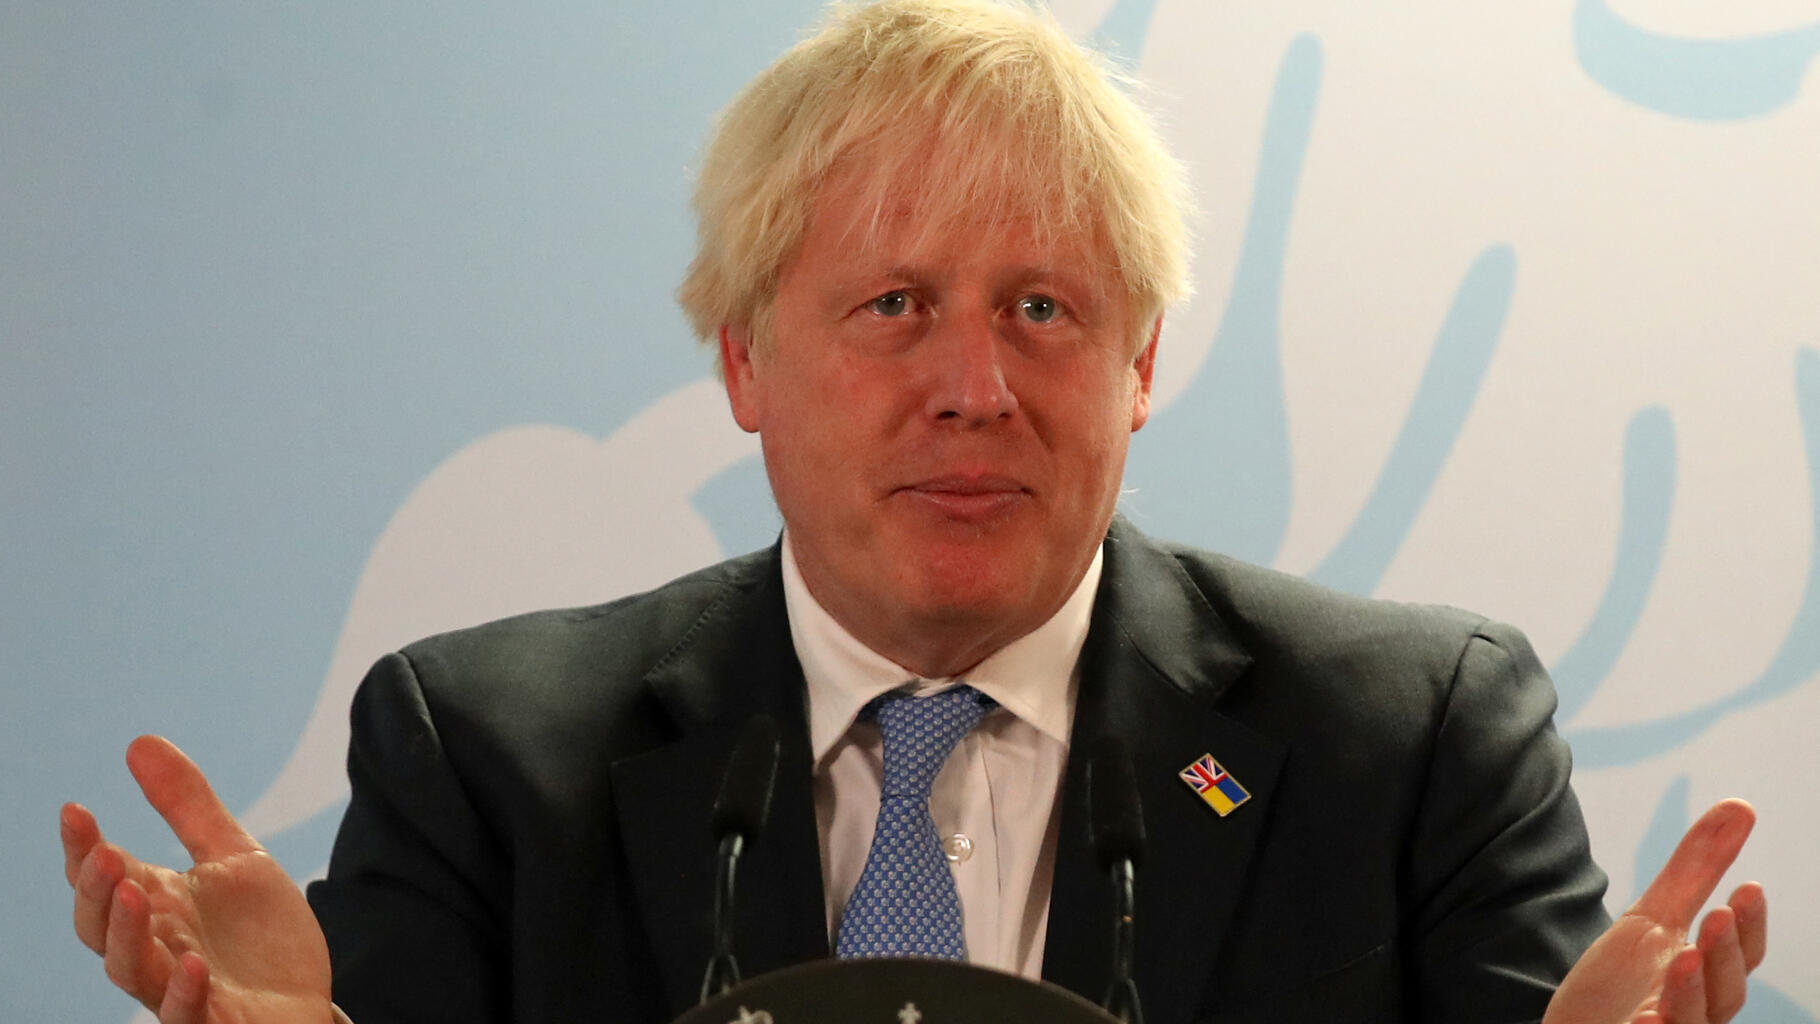 Johnson says Putin threatened to send a missile into the UK before the invasion of Ukraine